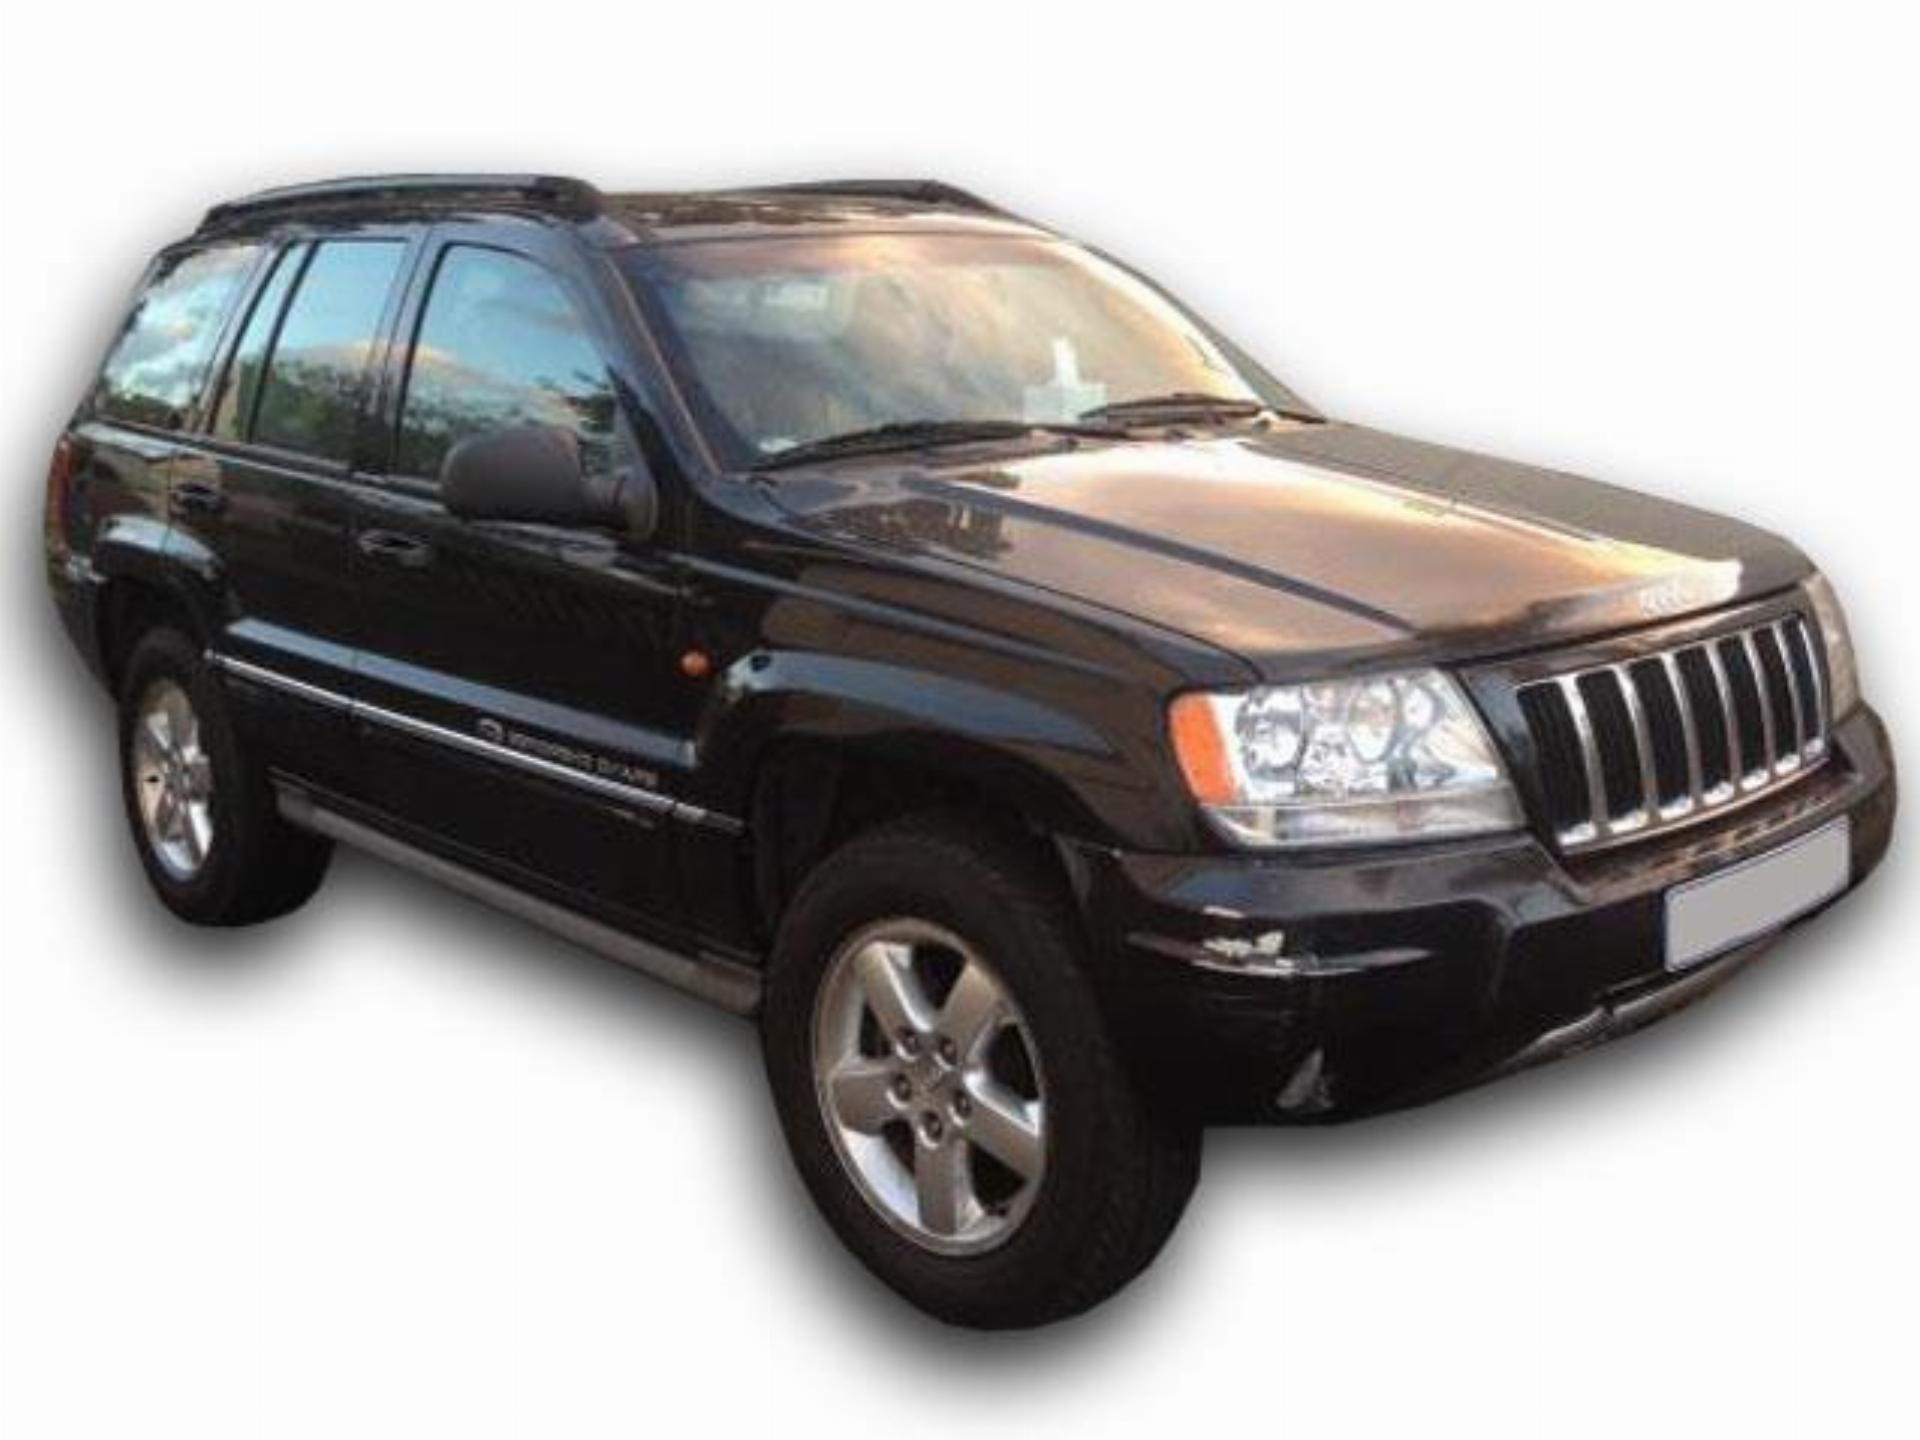 Used Jeep Grand Cherokee 2.7 Overland CRD 2004 on auction